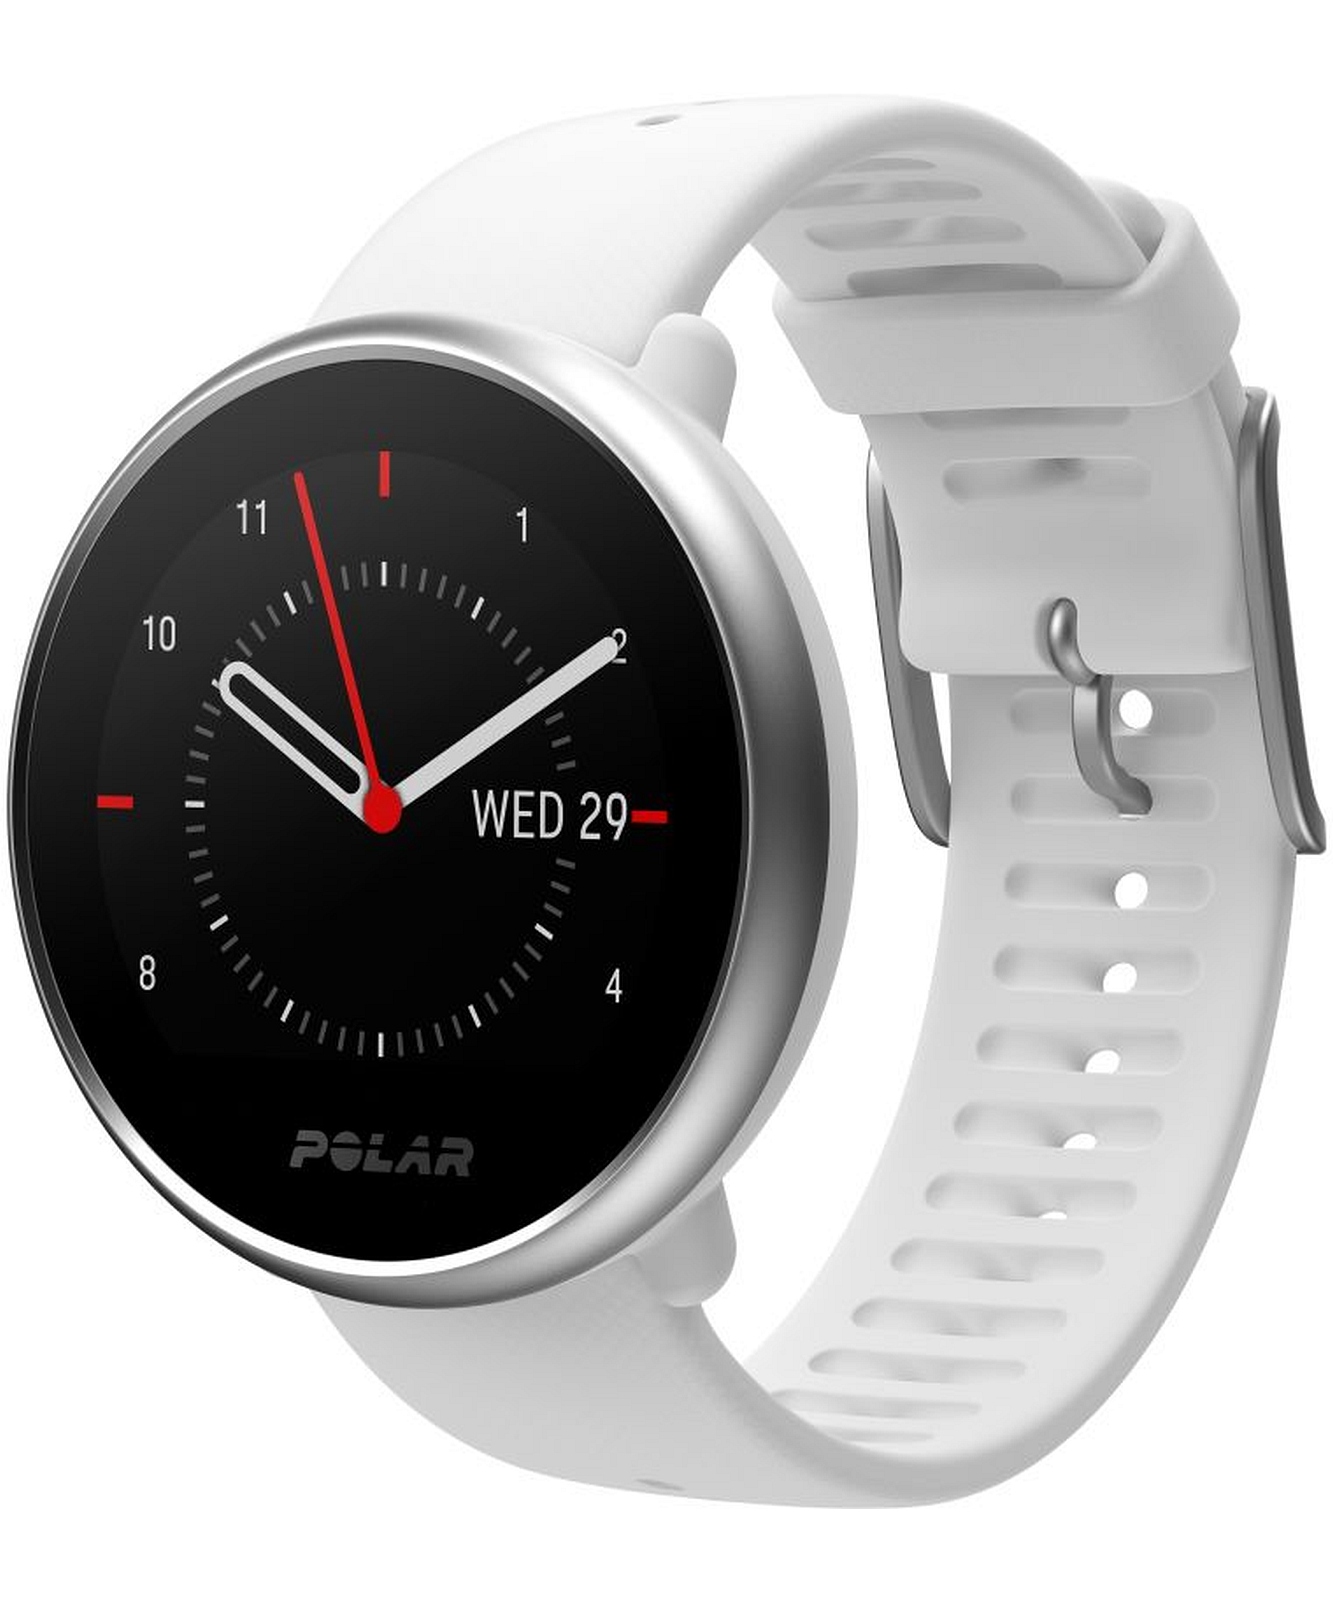 Polar Ignite 3 – a 30-day review of the iconic smartwatch!